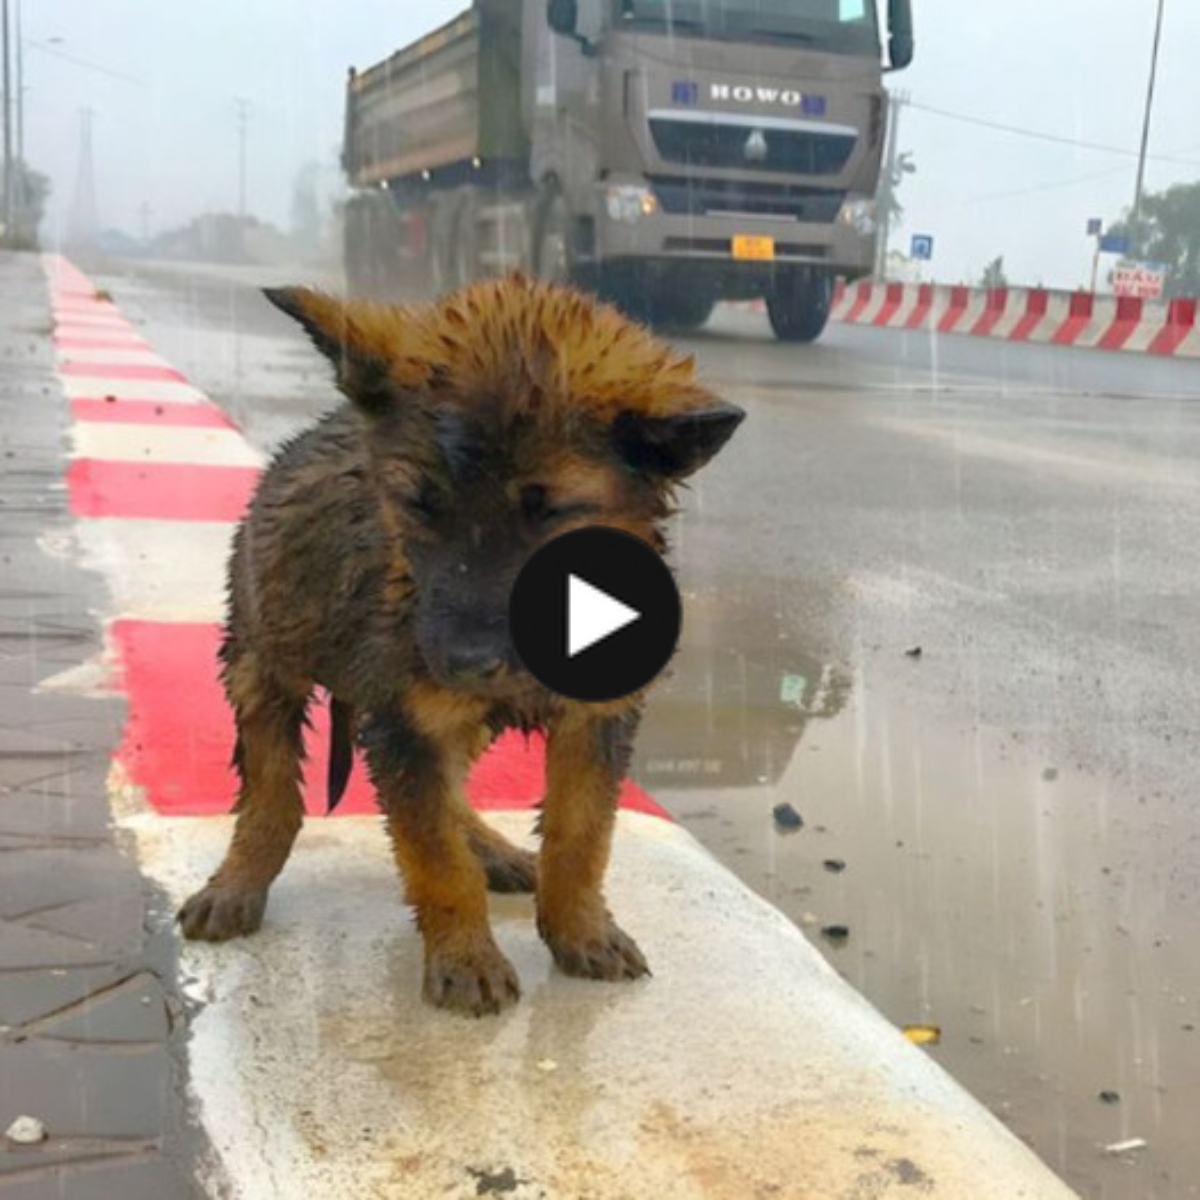 Lonely Stray in the Rain: The internet community has shown intense sorrow and worry in response to the abandoned puppy’s tragic search for sustenance in the pouring rain.